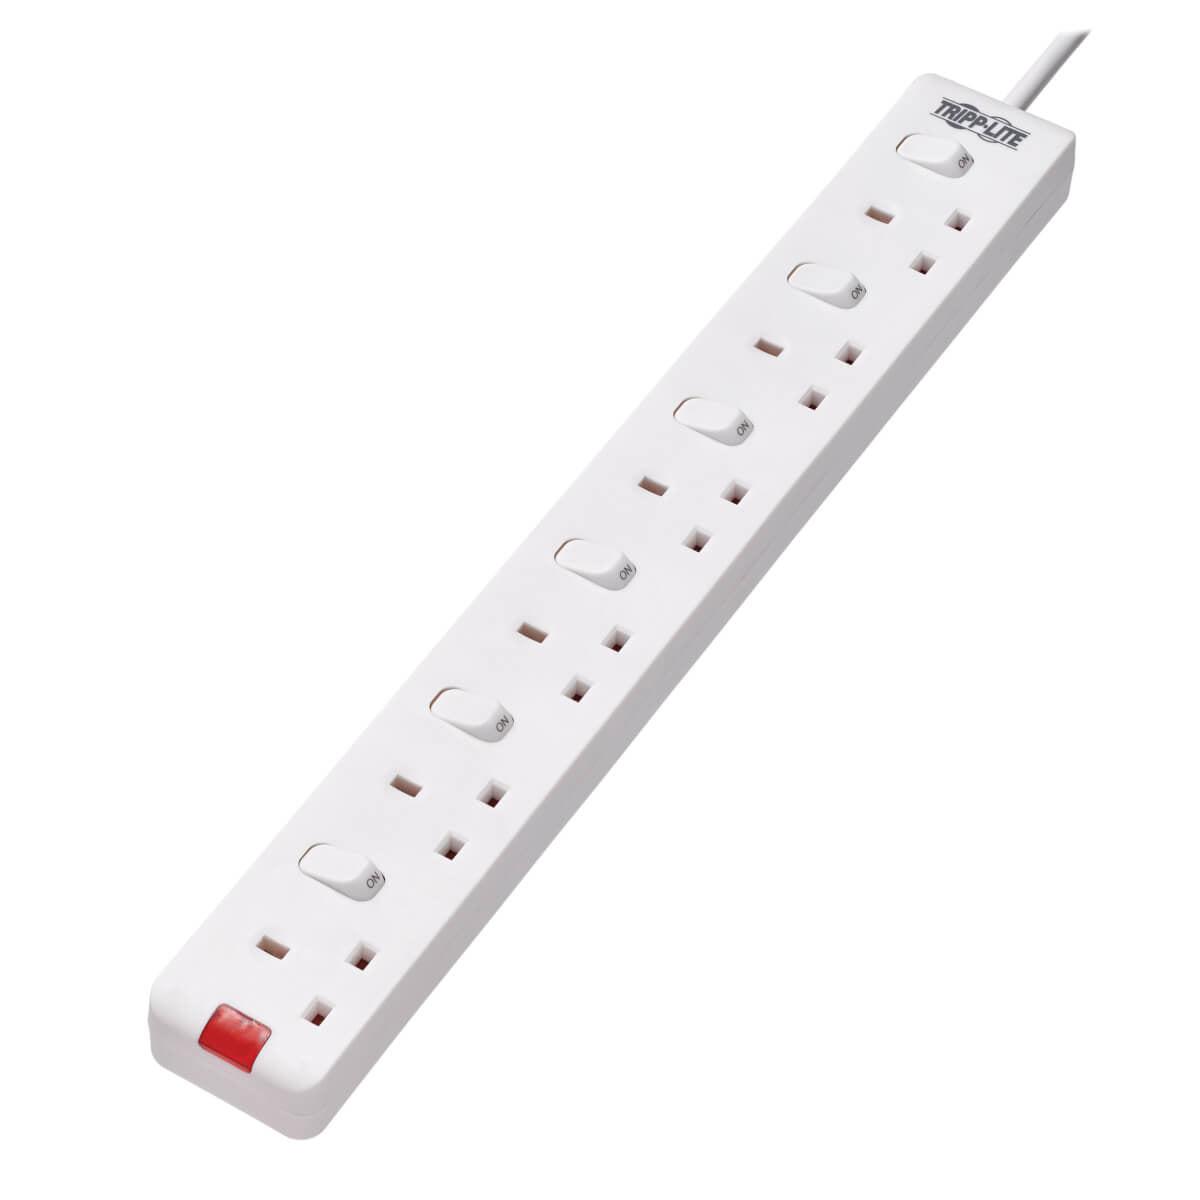 Tripp Lite Ps6B35W 6-Outlet Power Strip - British Bs1363A Outlets, Individually Switched, 220-250V, 13A, 3 M Cord, White